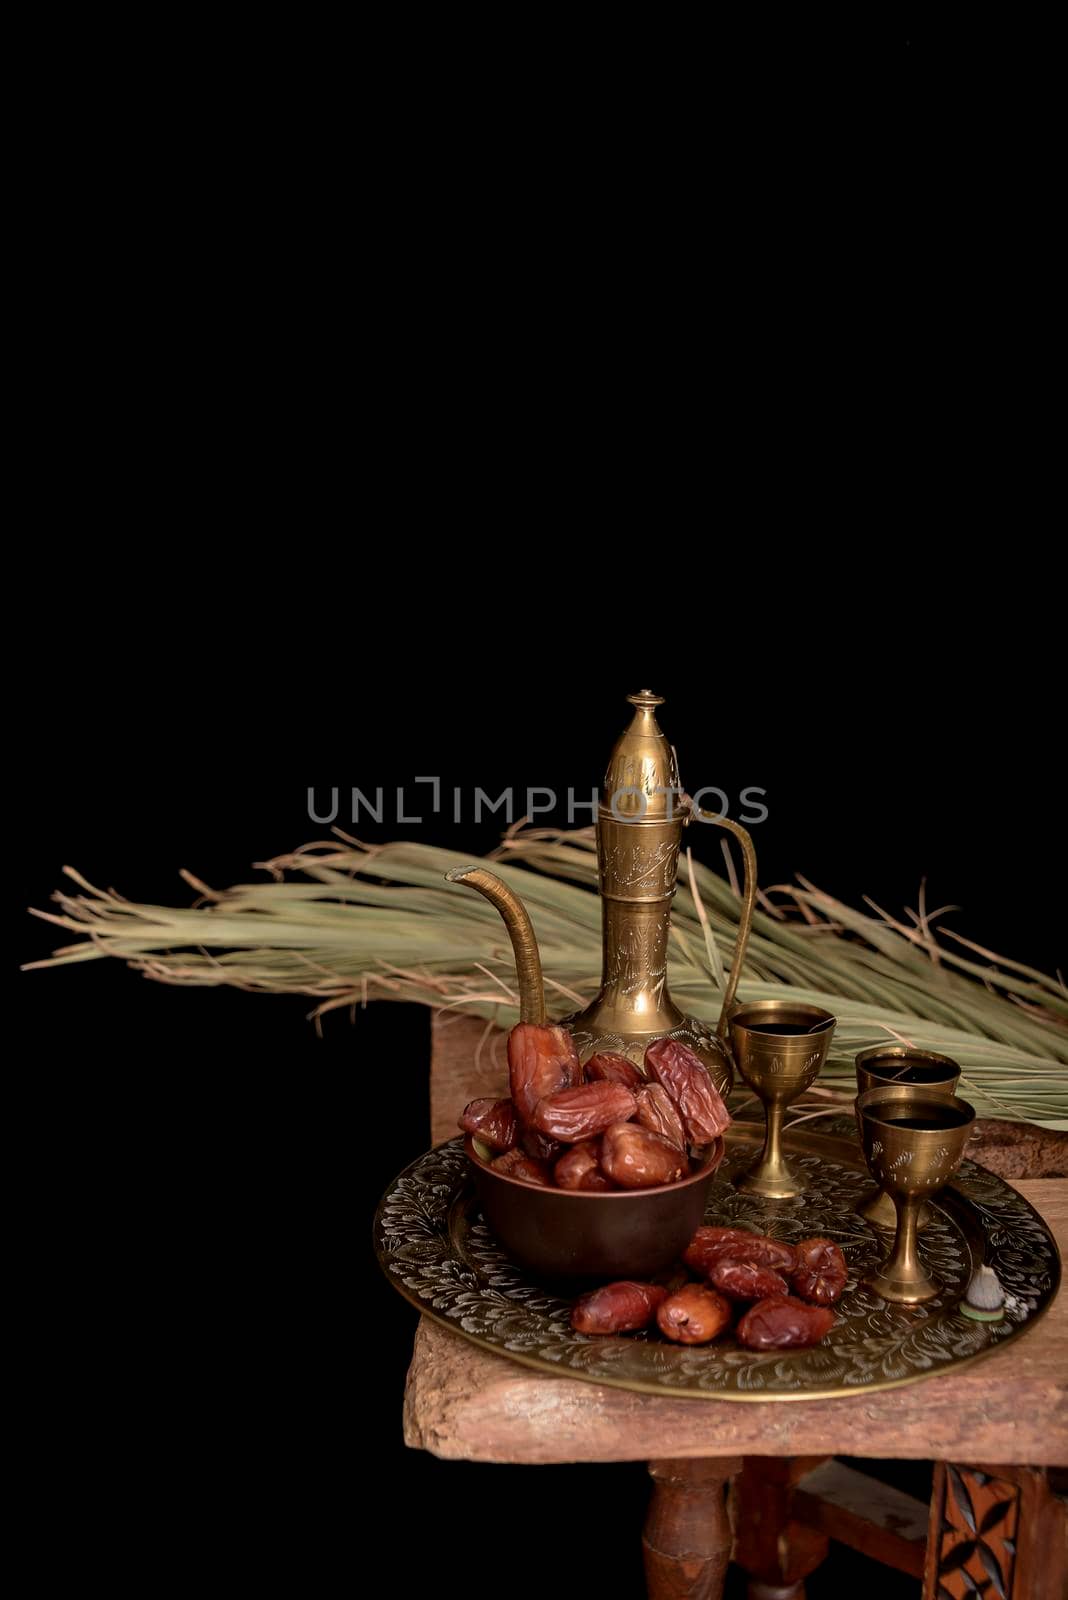 Ramadan Kareem Festive, close up of dates on wooden plate and rosary with oriental Lantern lamps and cup of black tea on wood background. Islamic Holy Month Greeting Card